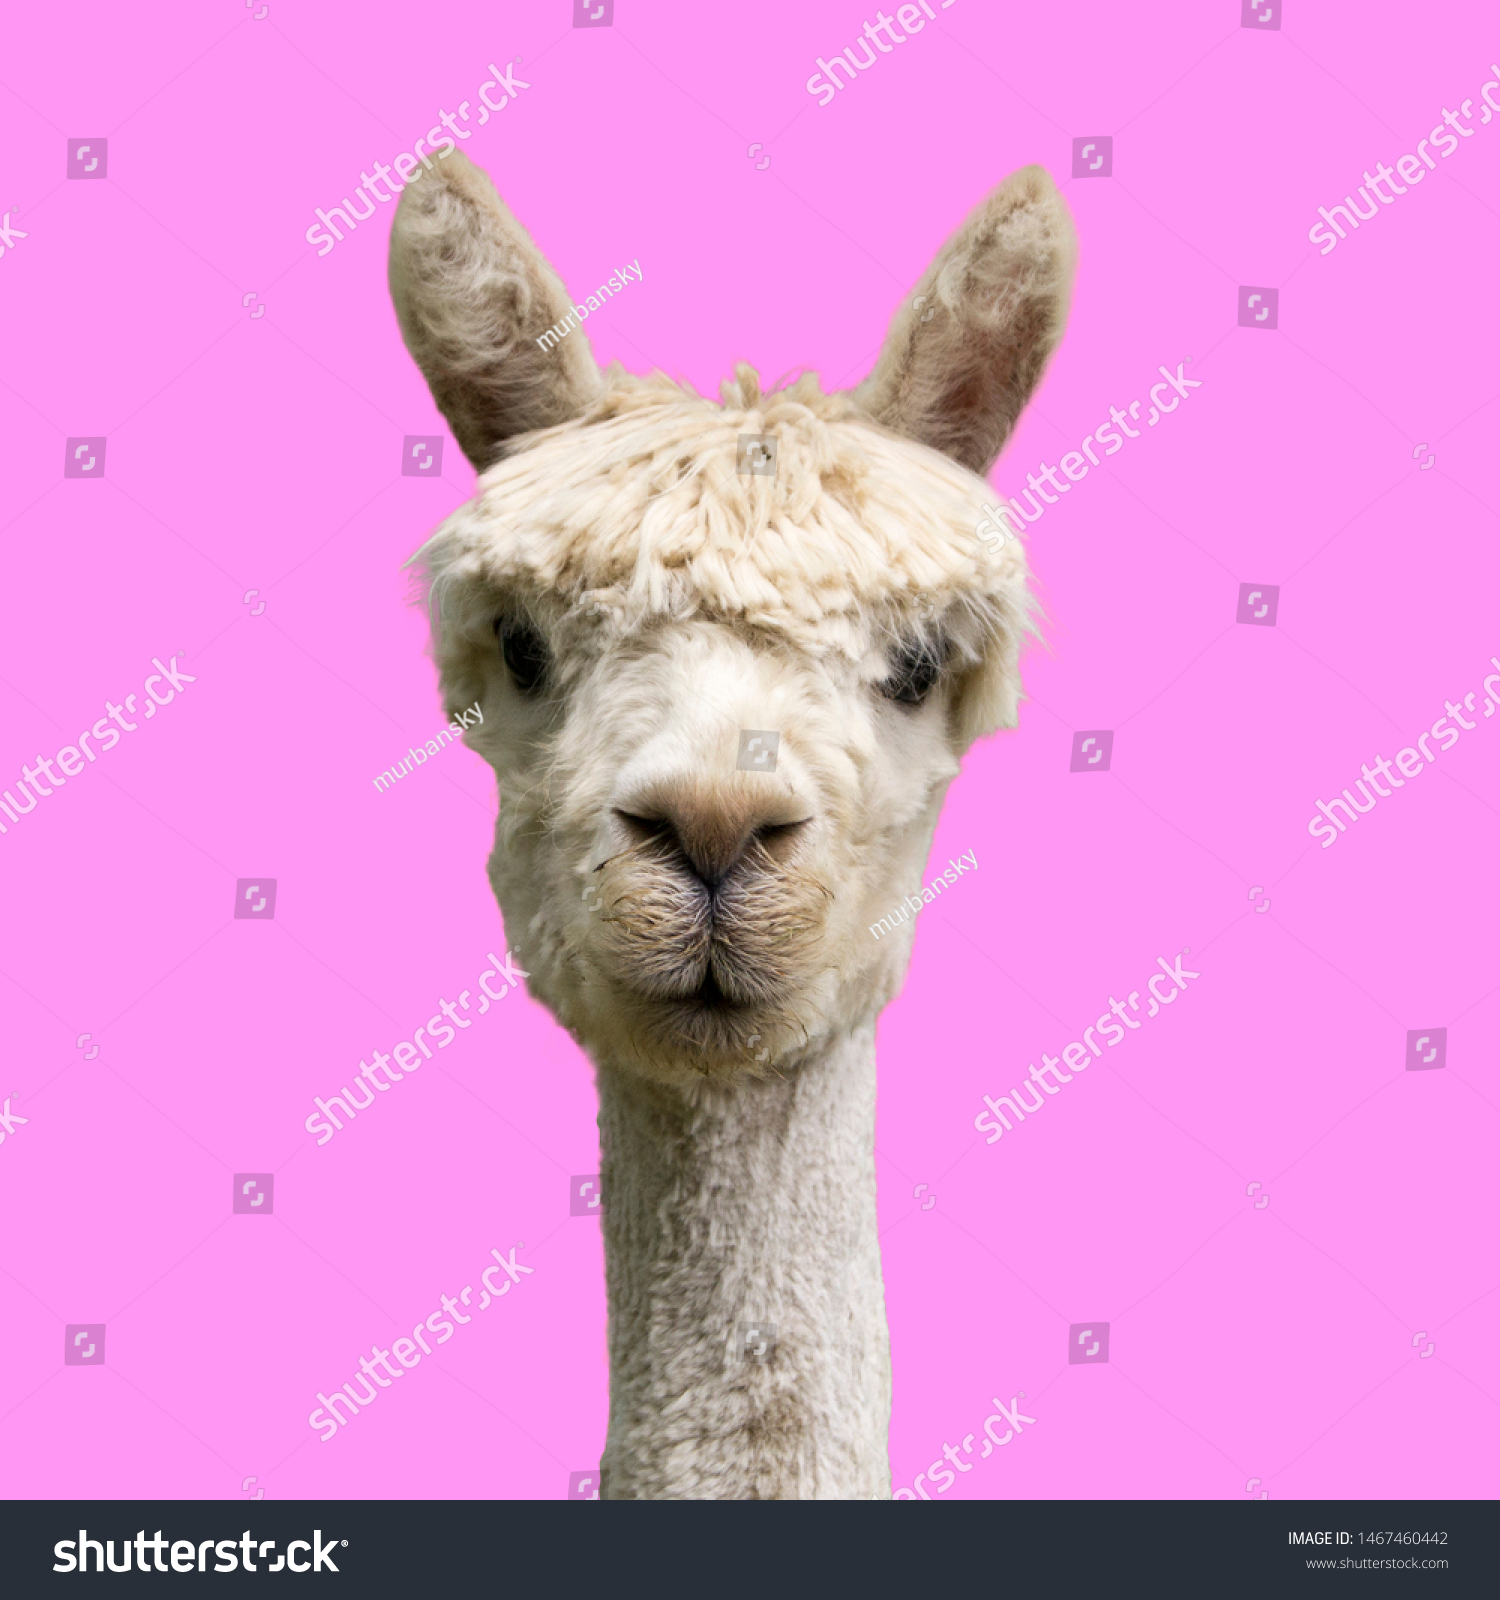 Funny alpaca on pink background #1467460442